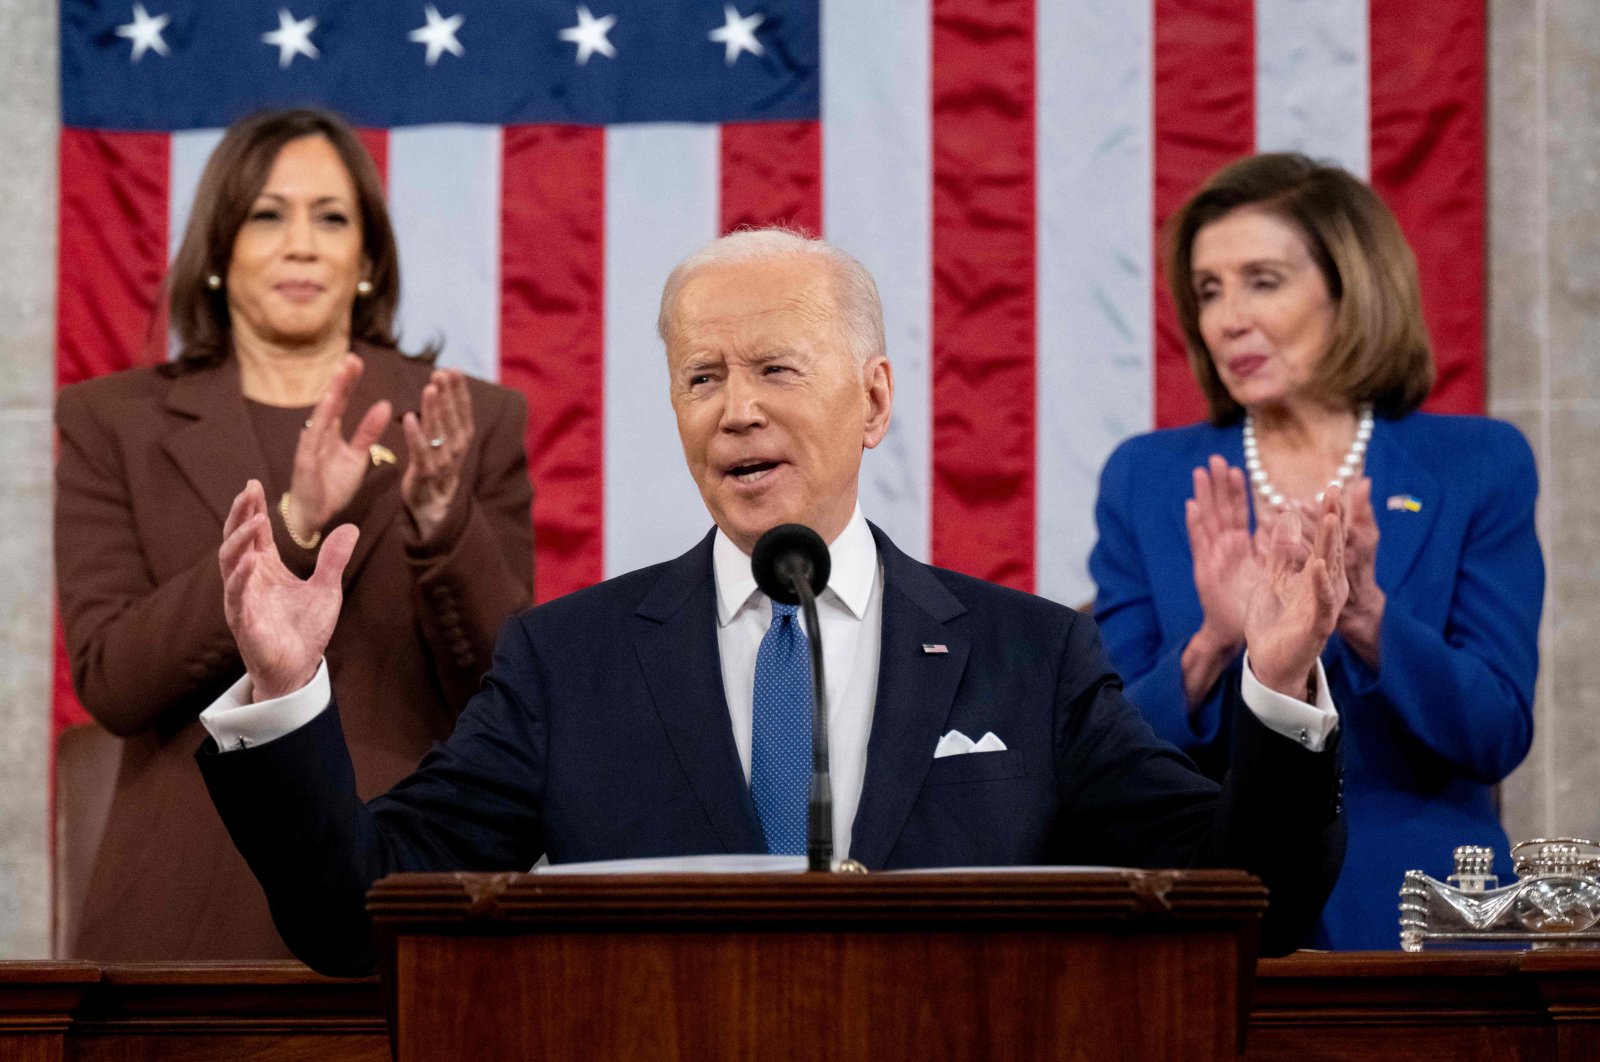 U.S. Vice President Kamala Harris (L) and U.S. House Speaker Nancy Pelosi applaud U.S. President Joe Biden (C) as he delivers his first State of the Union address at the US Capitol in Washington, D.C., U.S. on March 1, 2022. (AFP Photo)